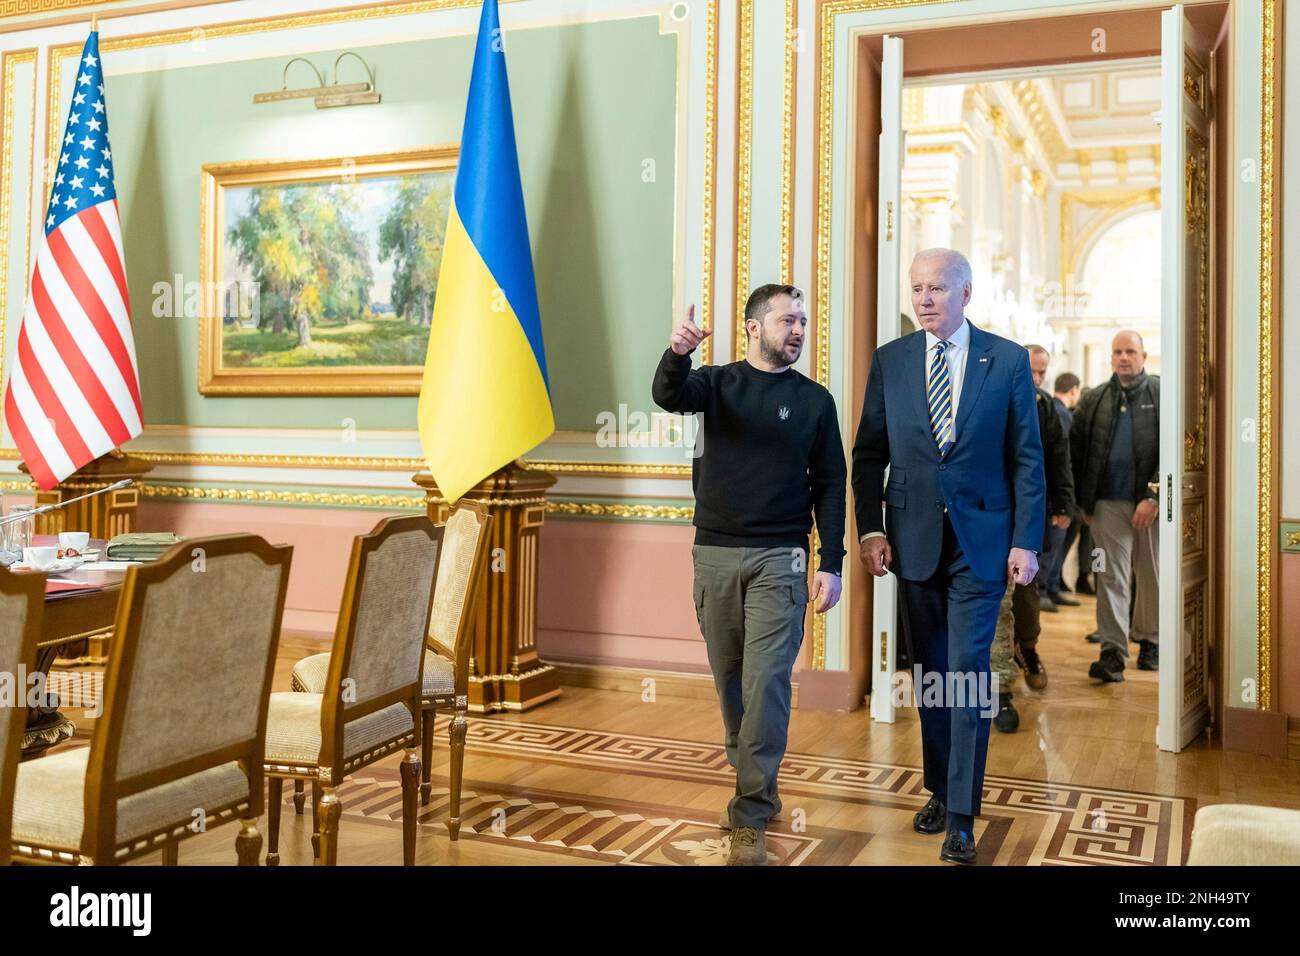 Kyiv, Ukraine. 20th Feb, 2023. U.S. President Joe Biden, right, is escorted by Ukrainian President Volodymyr Zelenskyy, left, to the expanded bilateral meeting at the Mariinsky Palace, February 20, 2023 in Kyiv, Ukraine. Biden stopped in Kiev on an unannounced visit to renew American support for Ukraine. Credit: Adam Schultz/White House Photo/Alamy Live News Stock Photo